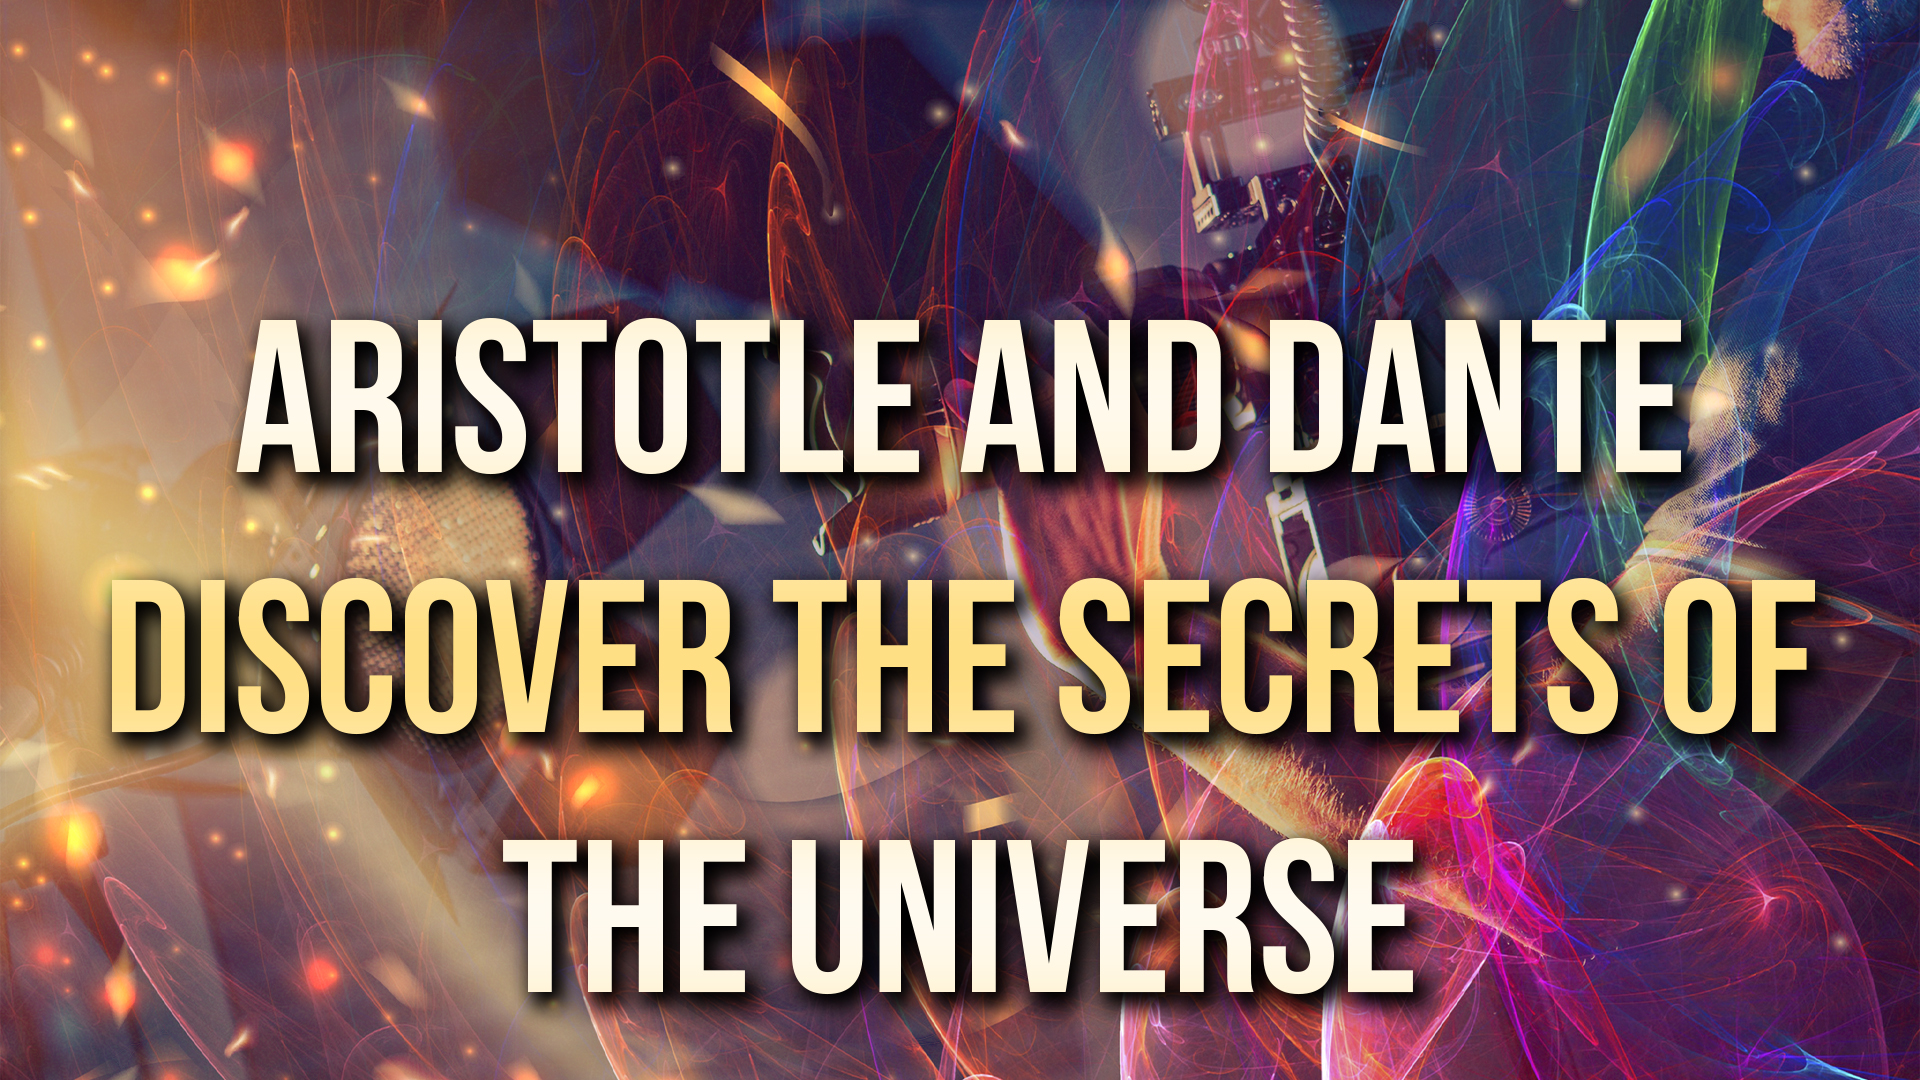 Aristotle And Dante Discover The Secrets Of The Universe Ending Explained [SPOILER!]